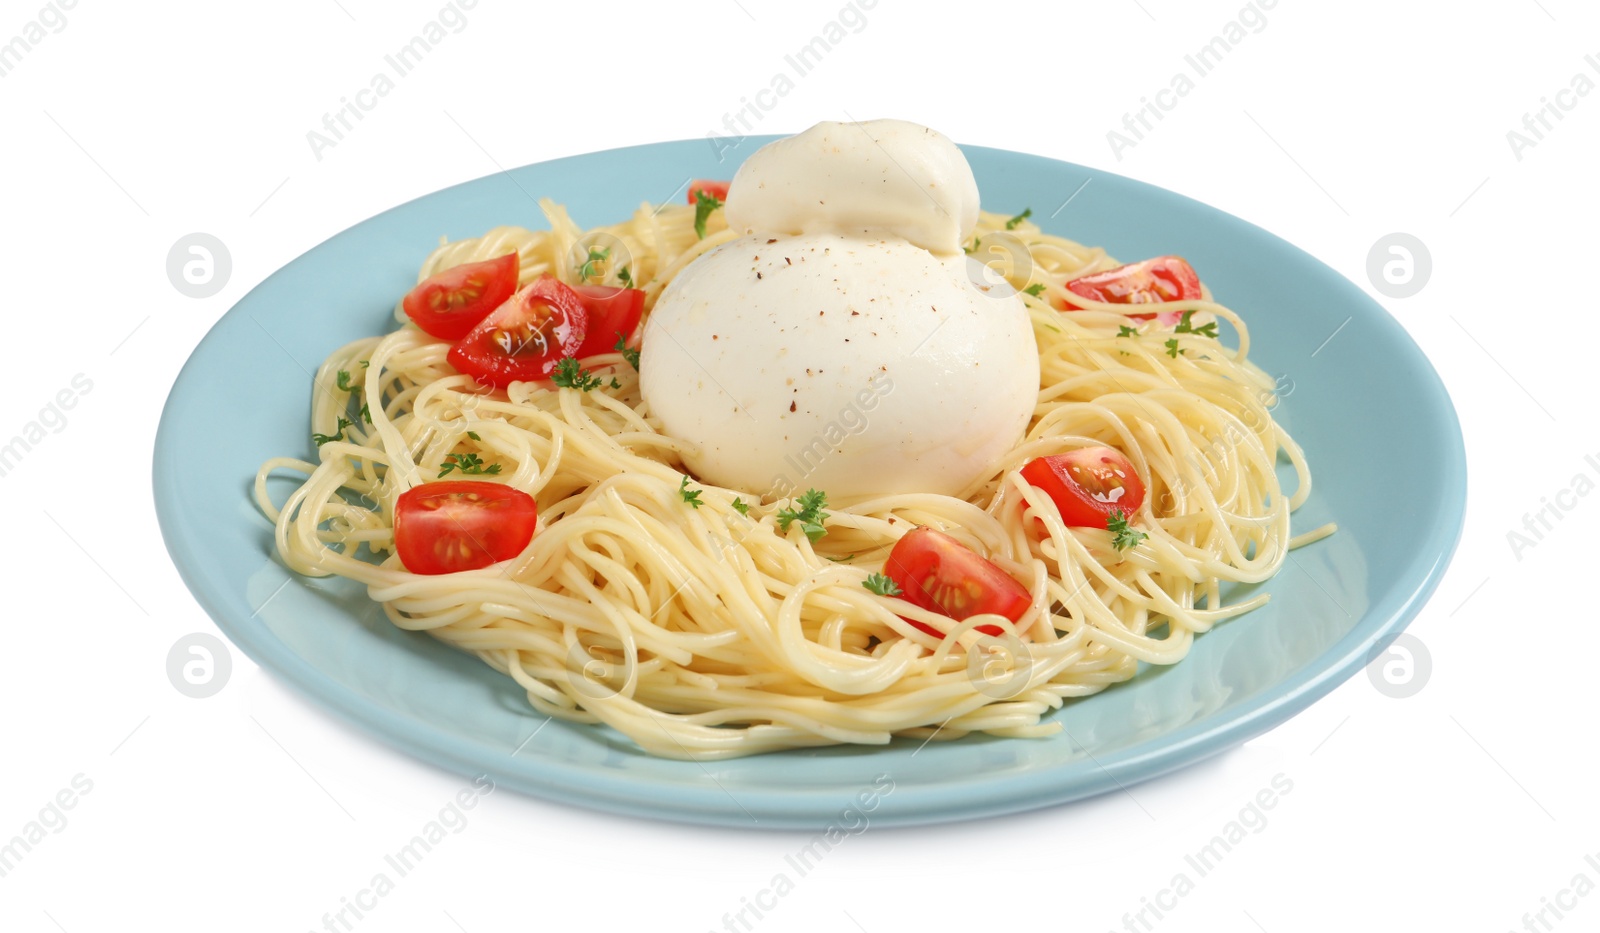 Photo of Plate of delicious pasta with burrata and tomatoes isolated on white